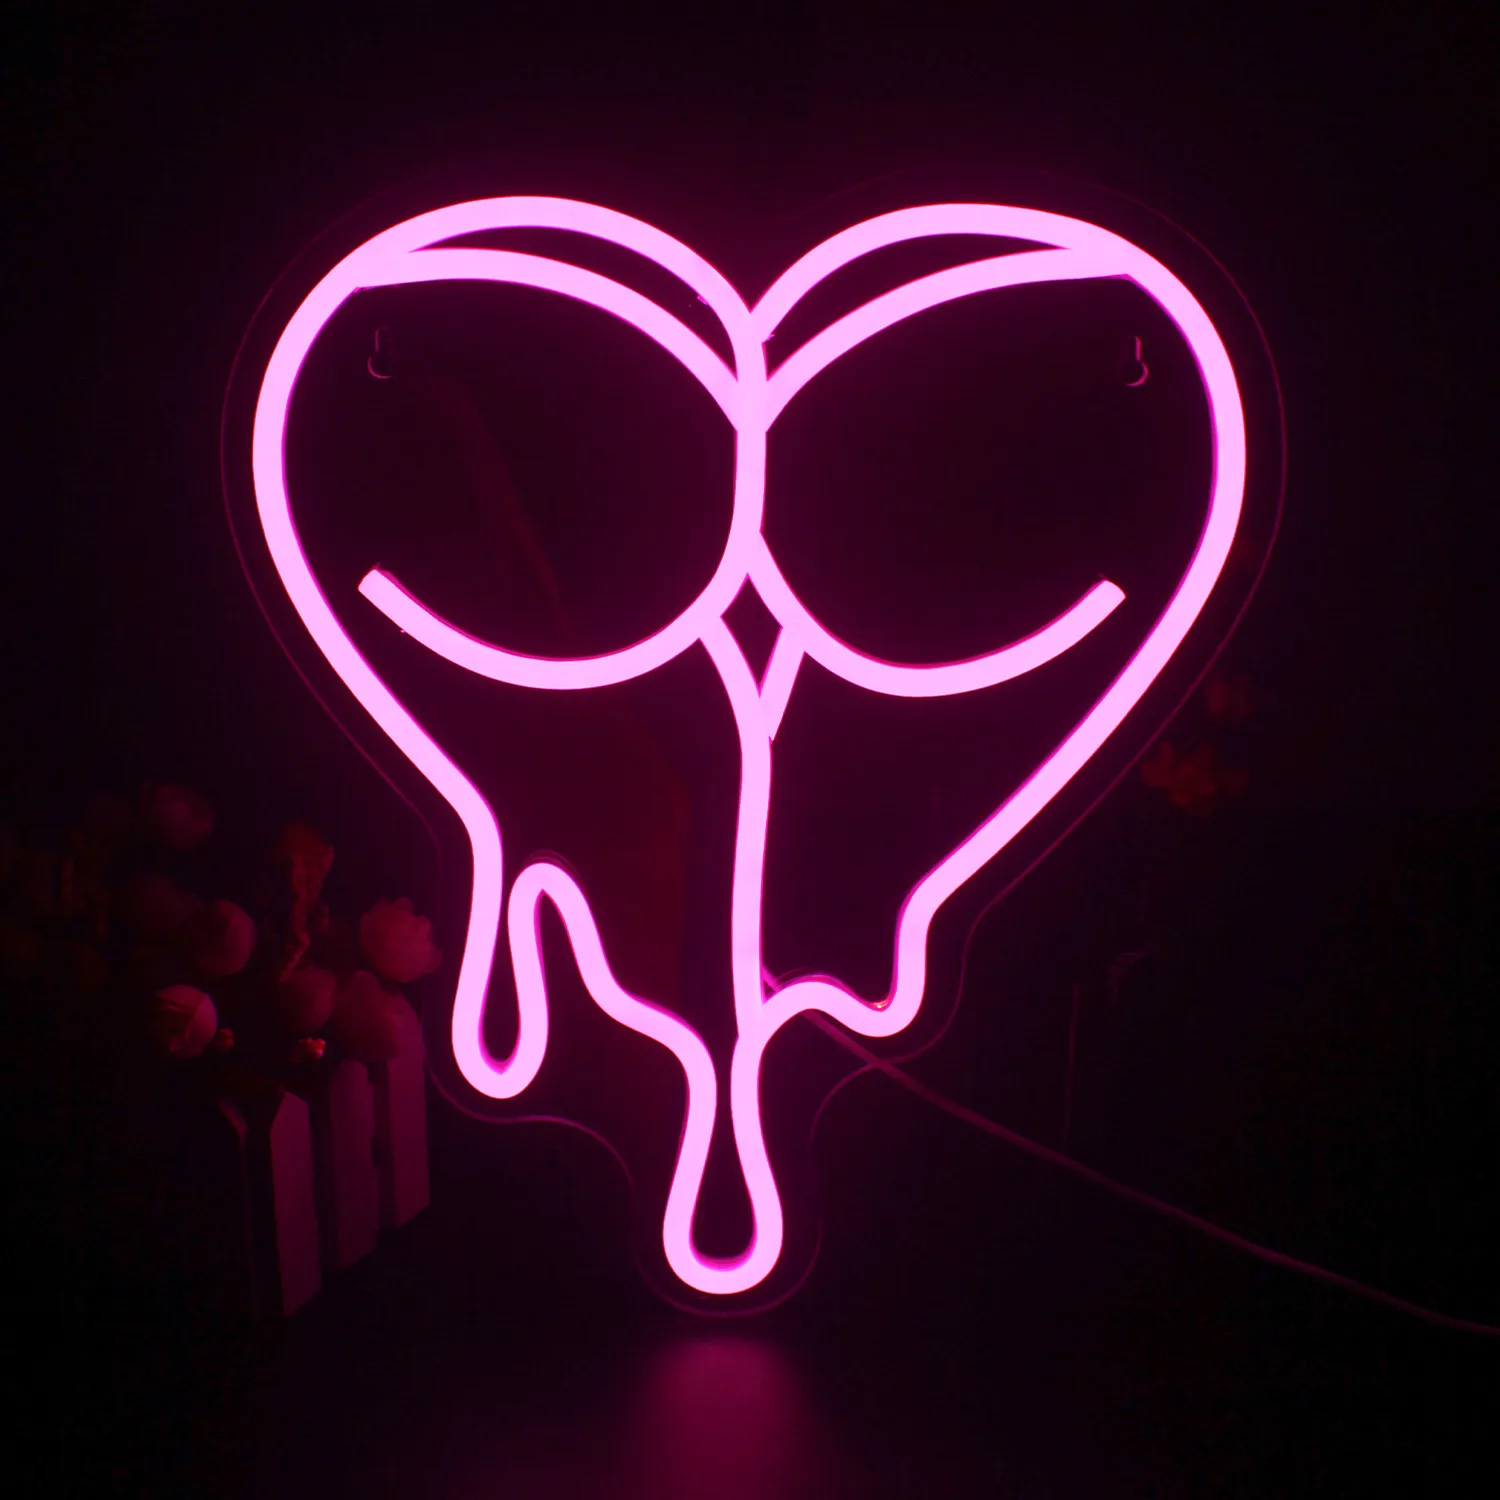 Ineonlife Neon Sign Love Ass Custom Acrylic Sign Neon Pink Lightings Goth Room Home Bar Party Room Wall Decorations For Girls marry me neon sign light wall art gifts neon sign acrylic wall decorations neon sign for wedding party led neon light sign decor